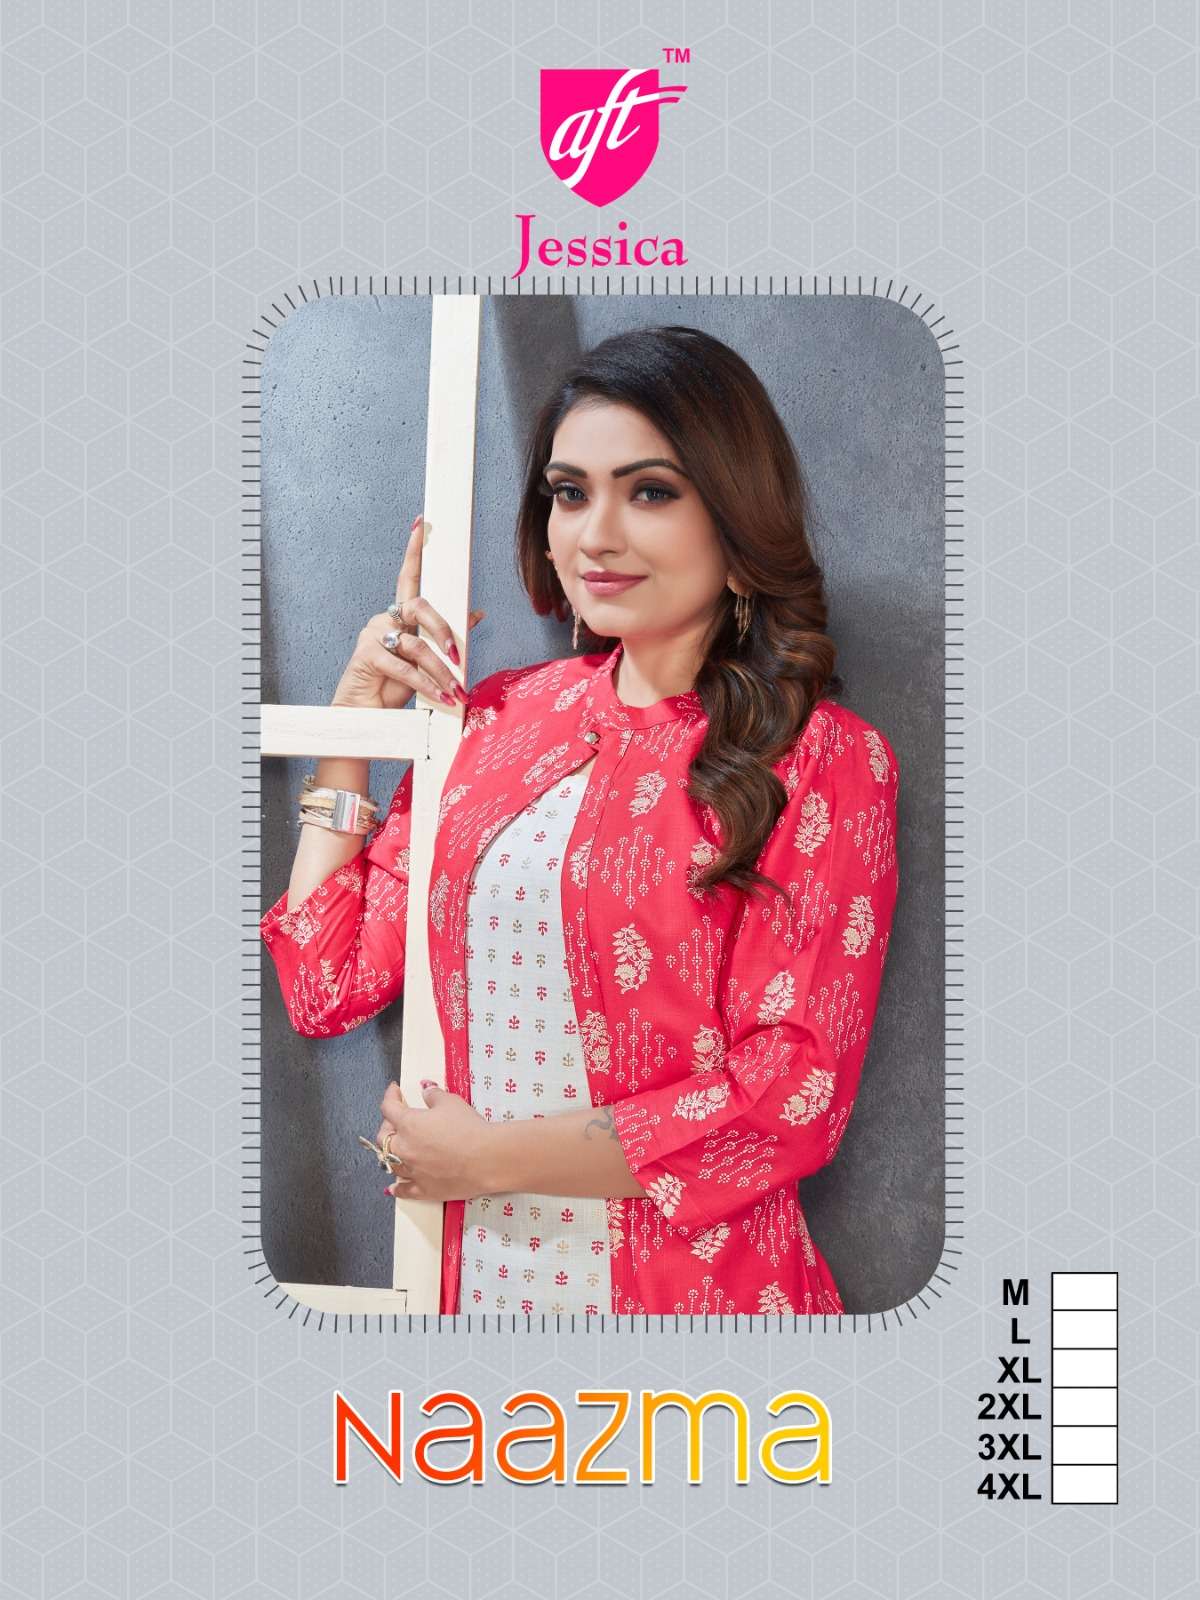 AFT JESSICA NAAZMA NEW HEAVY FANCY DESIGNER RAYON KURTI WITH SHRUG FESTIVAL COLLECTION WHOLESALER